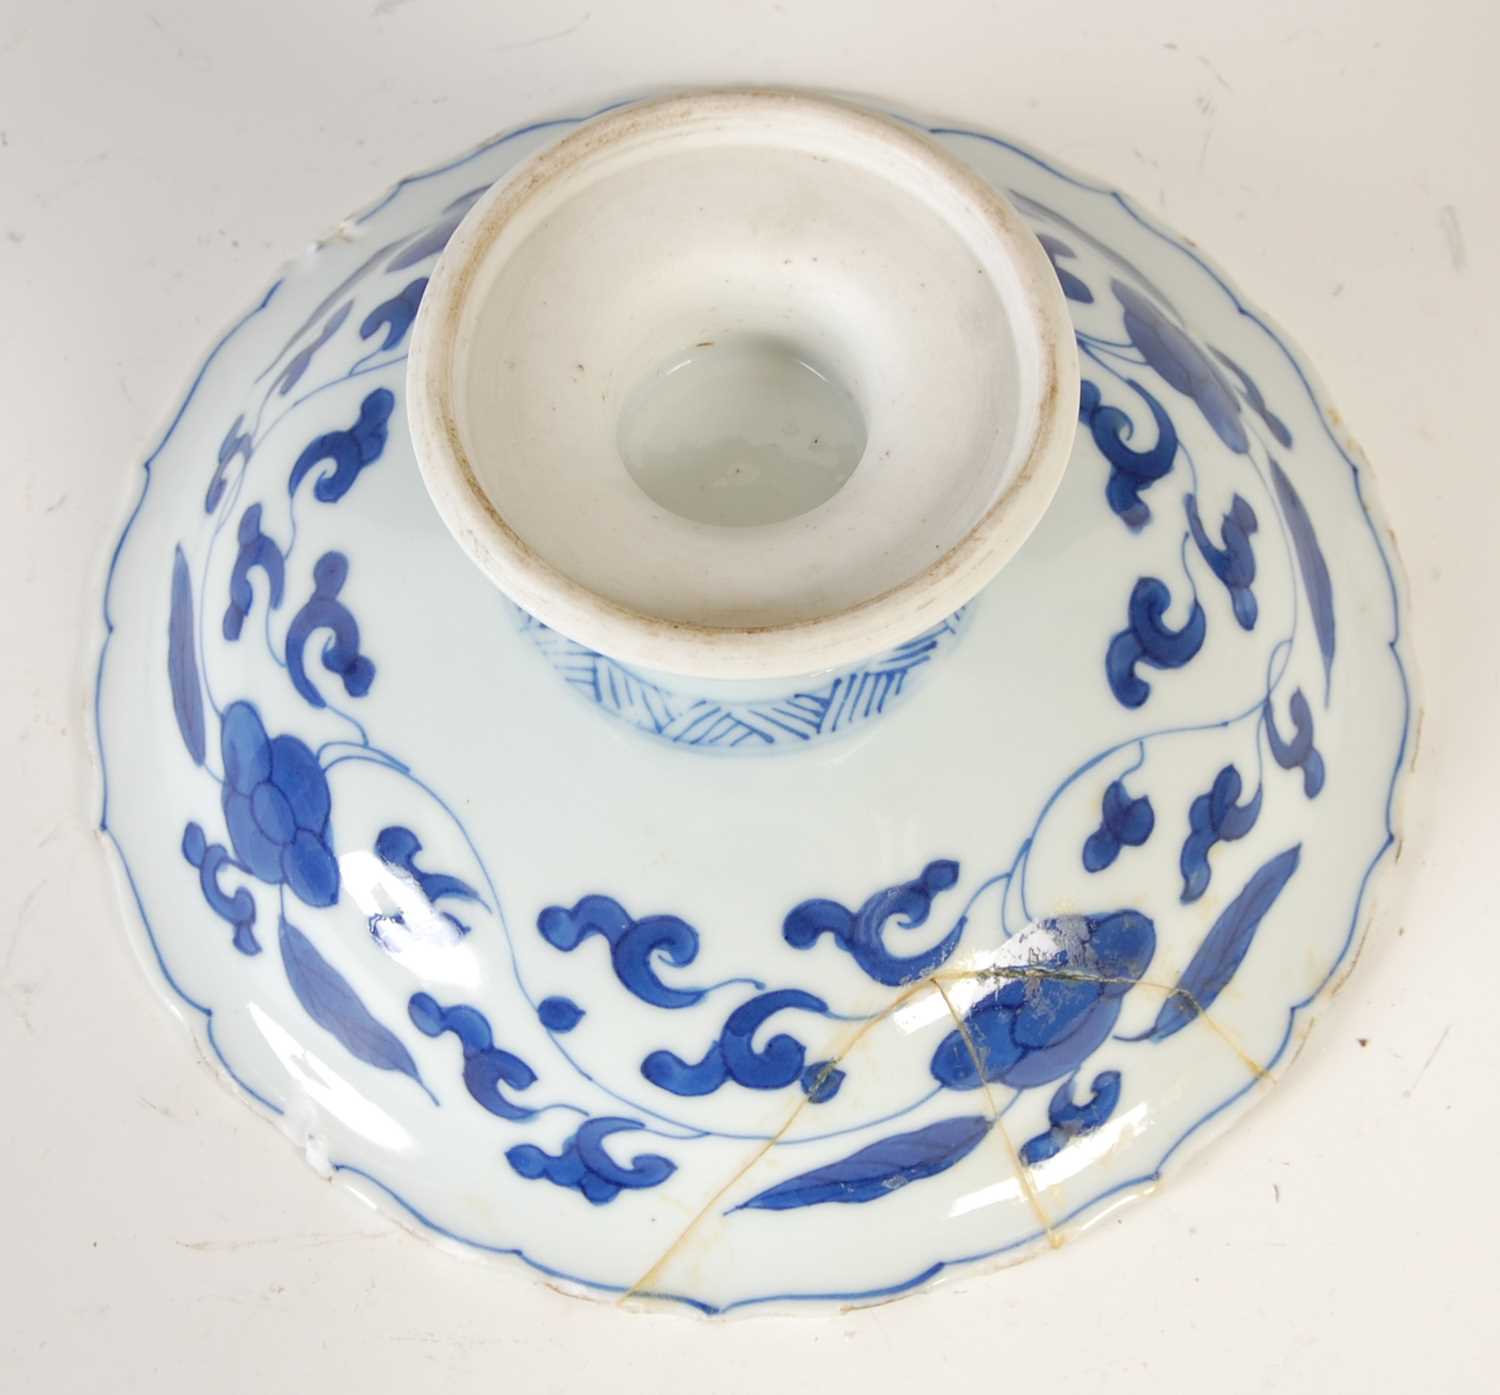 A Chinese porcelain blue and white tazza, Qing Dynasty, decorated with central roundel of bird - Image 10 of 11